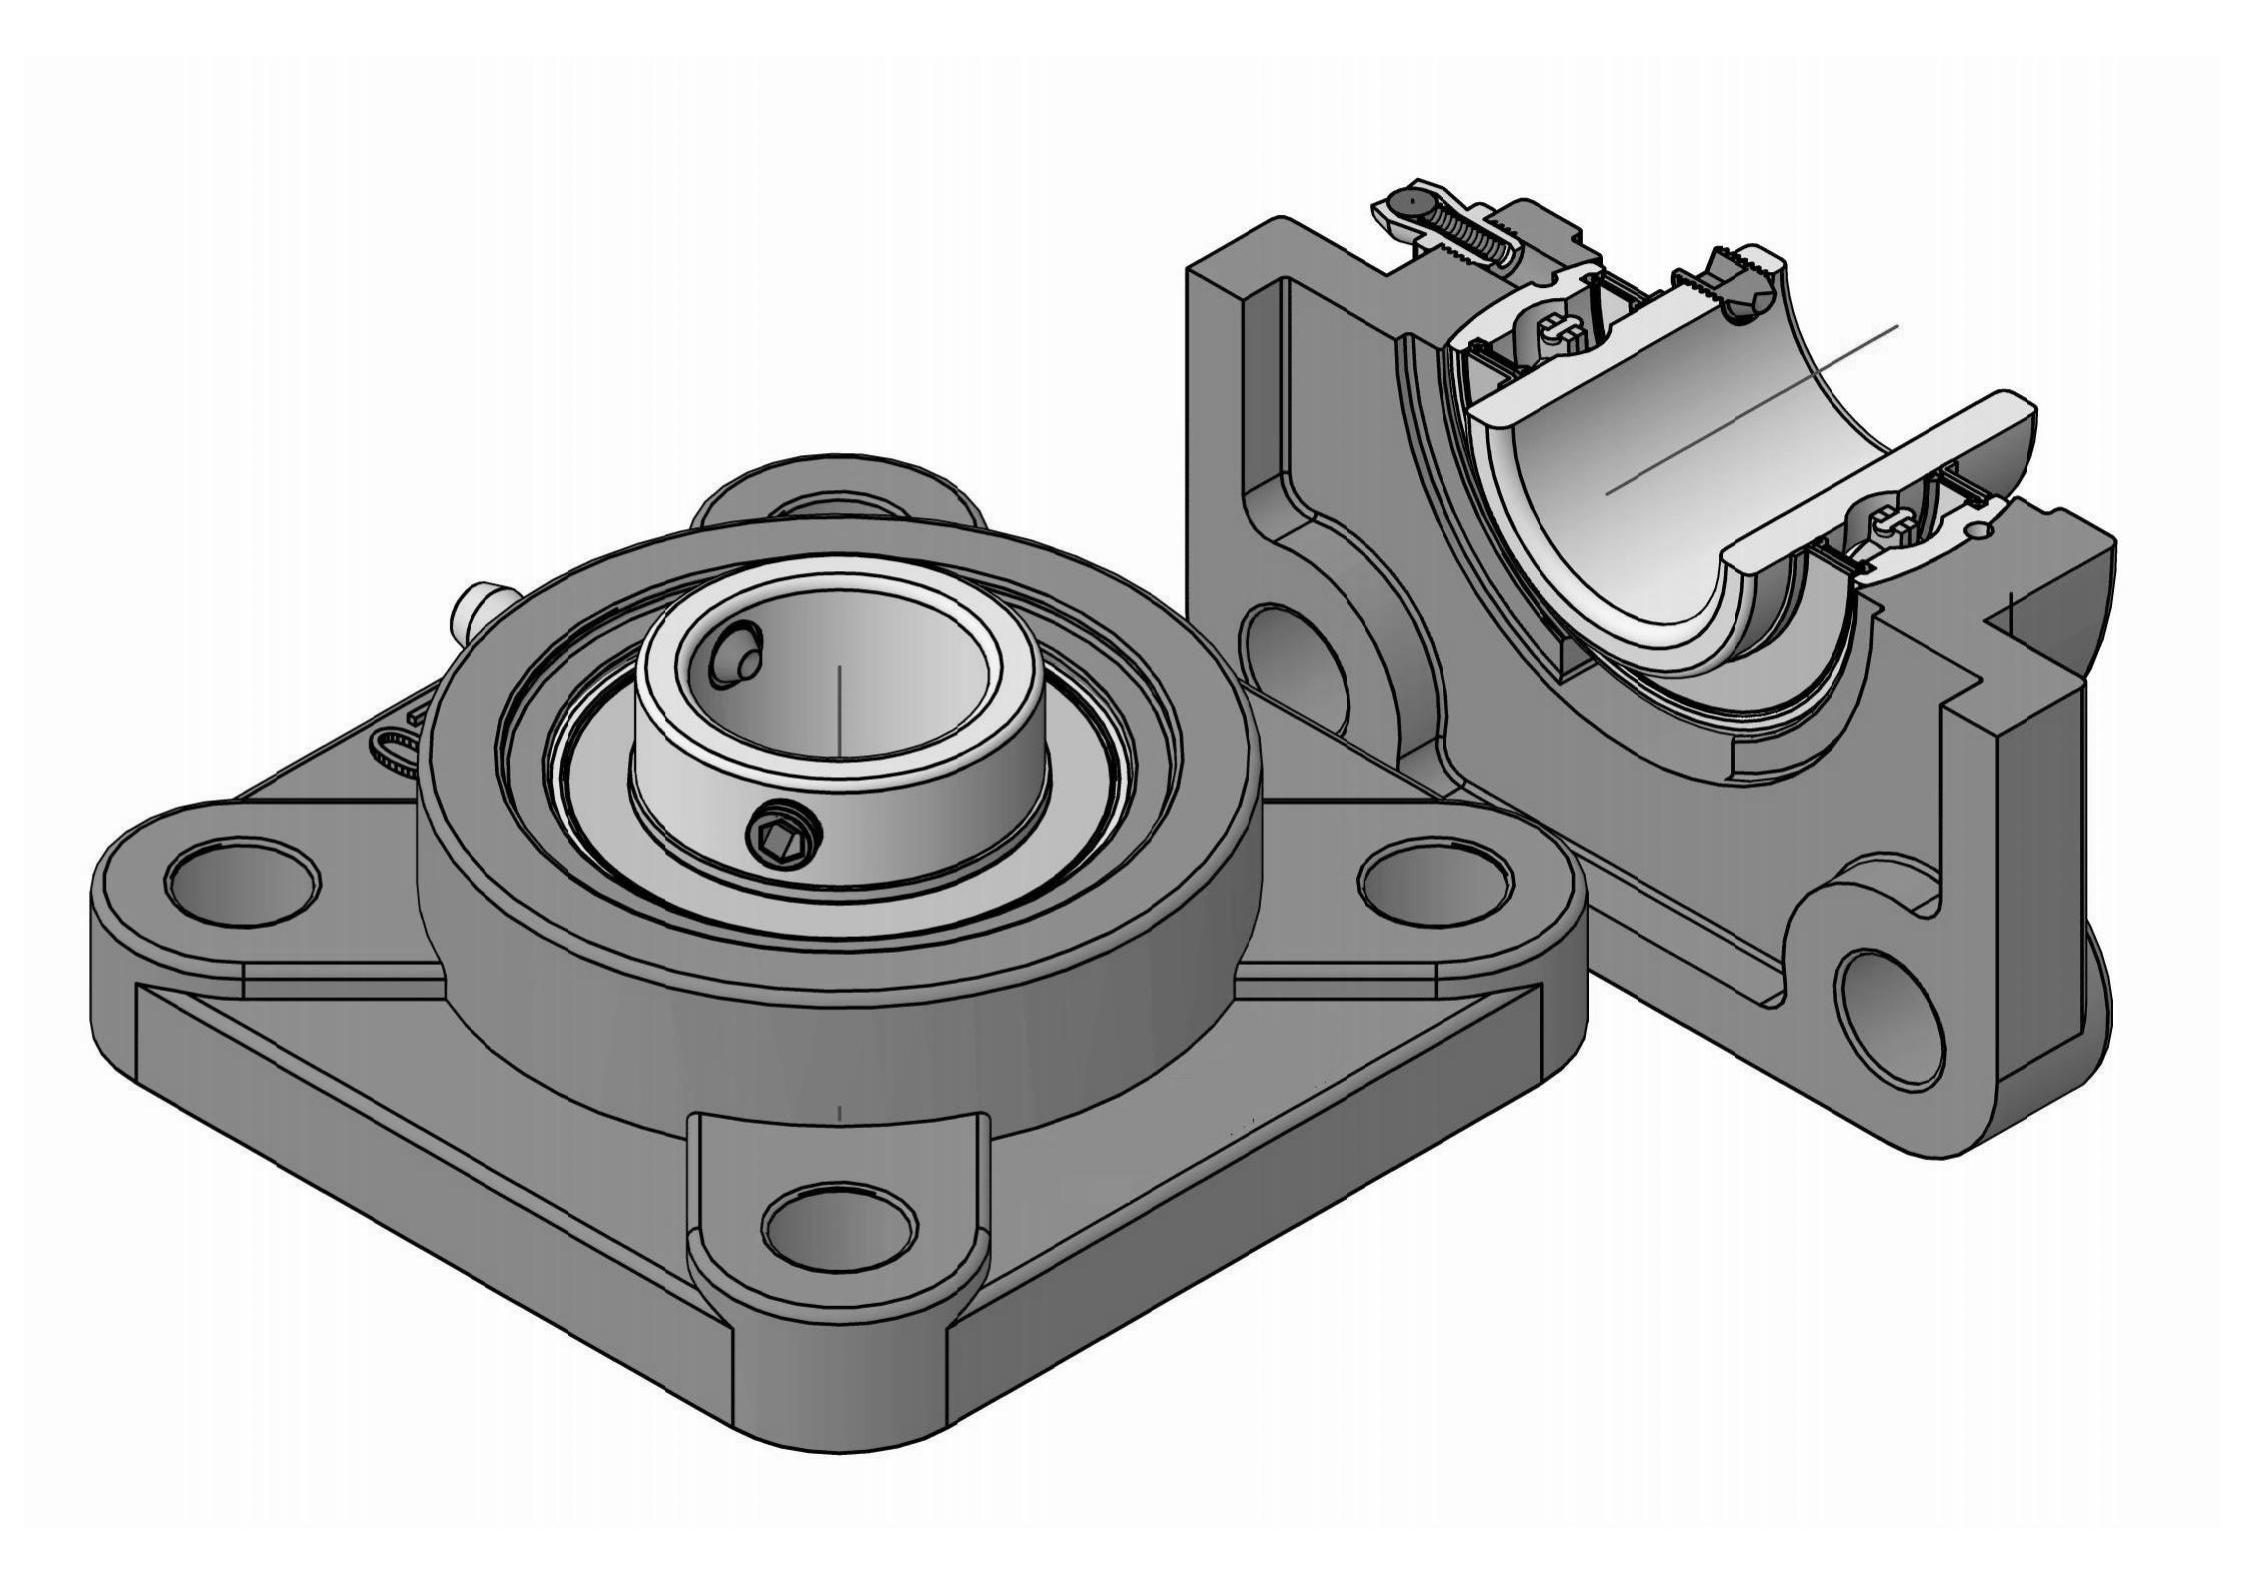 UCFX06-19 four Bolt Square flange bearing units with 1-3/16 inch bore